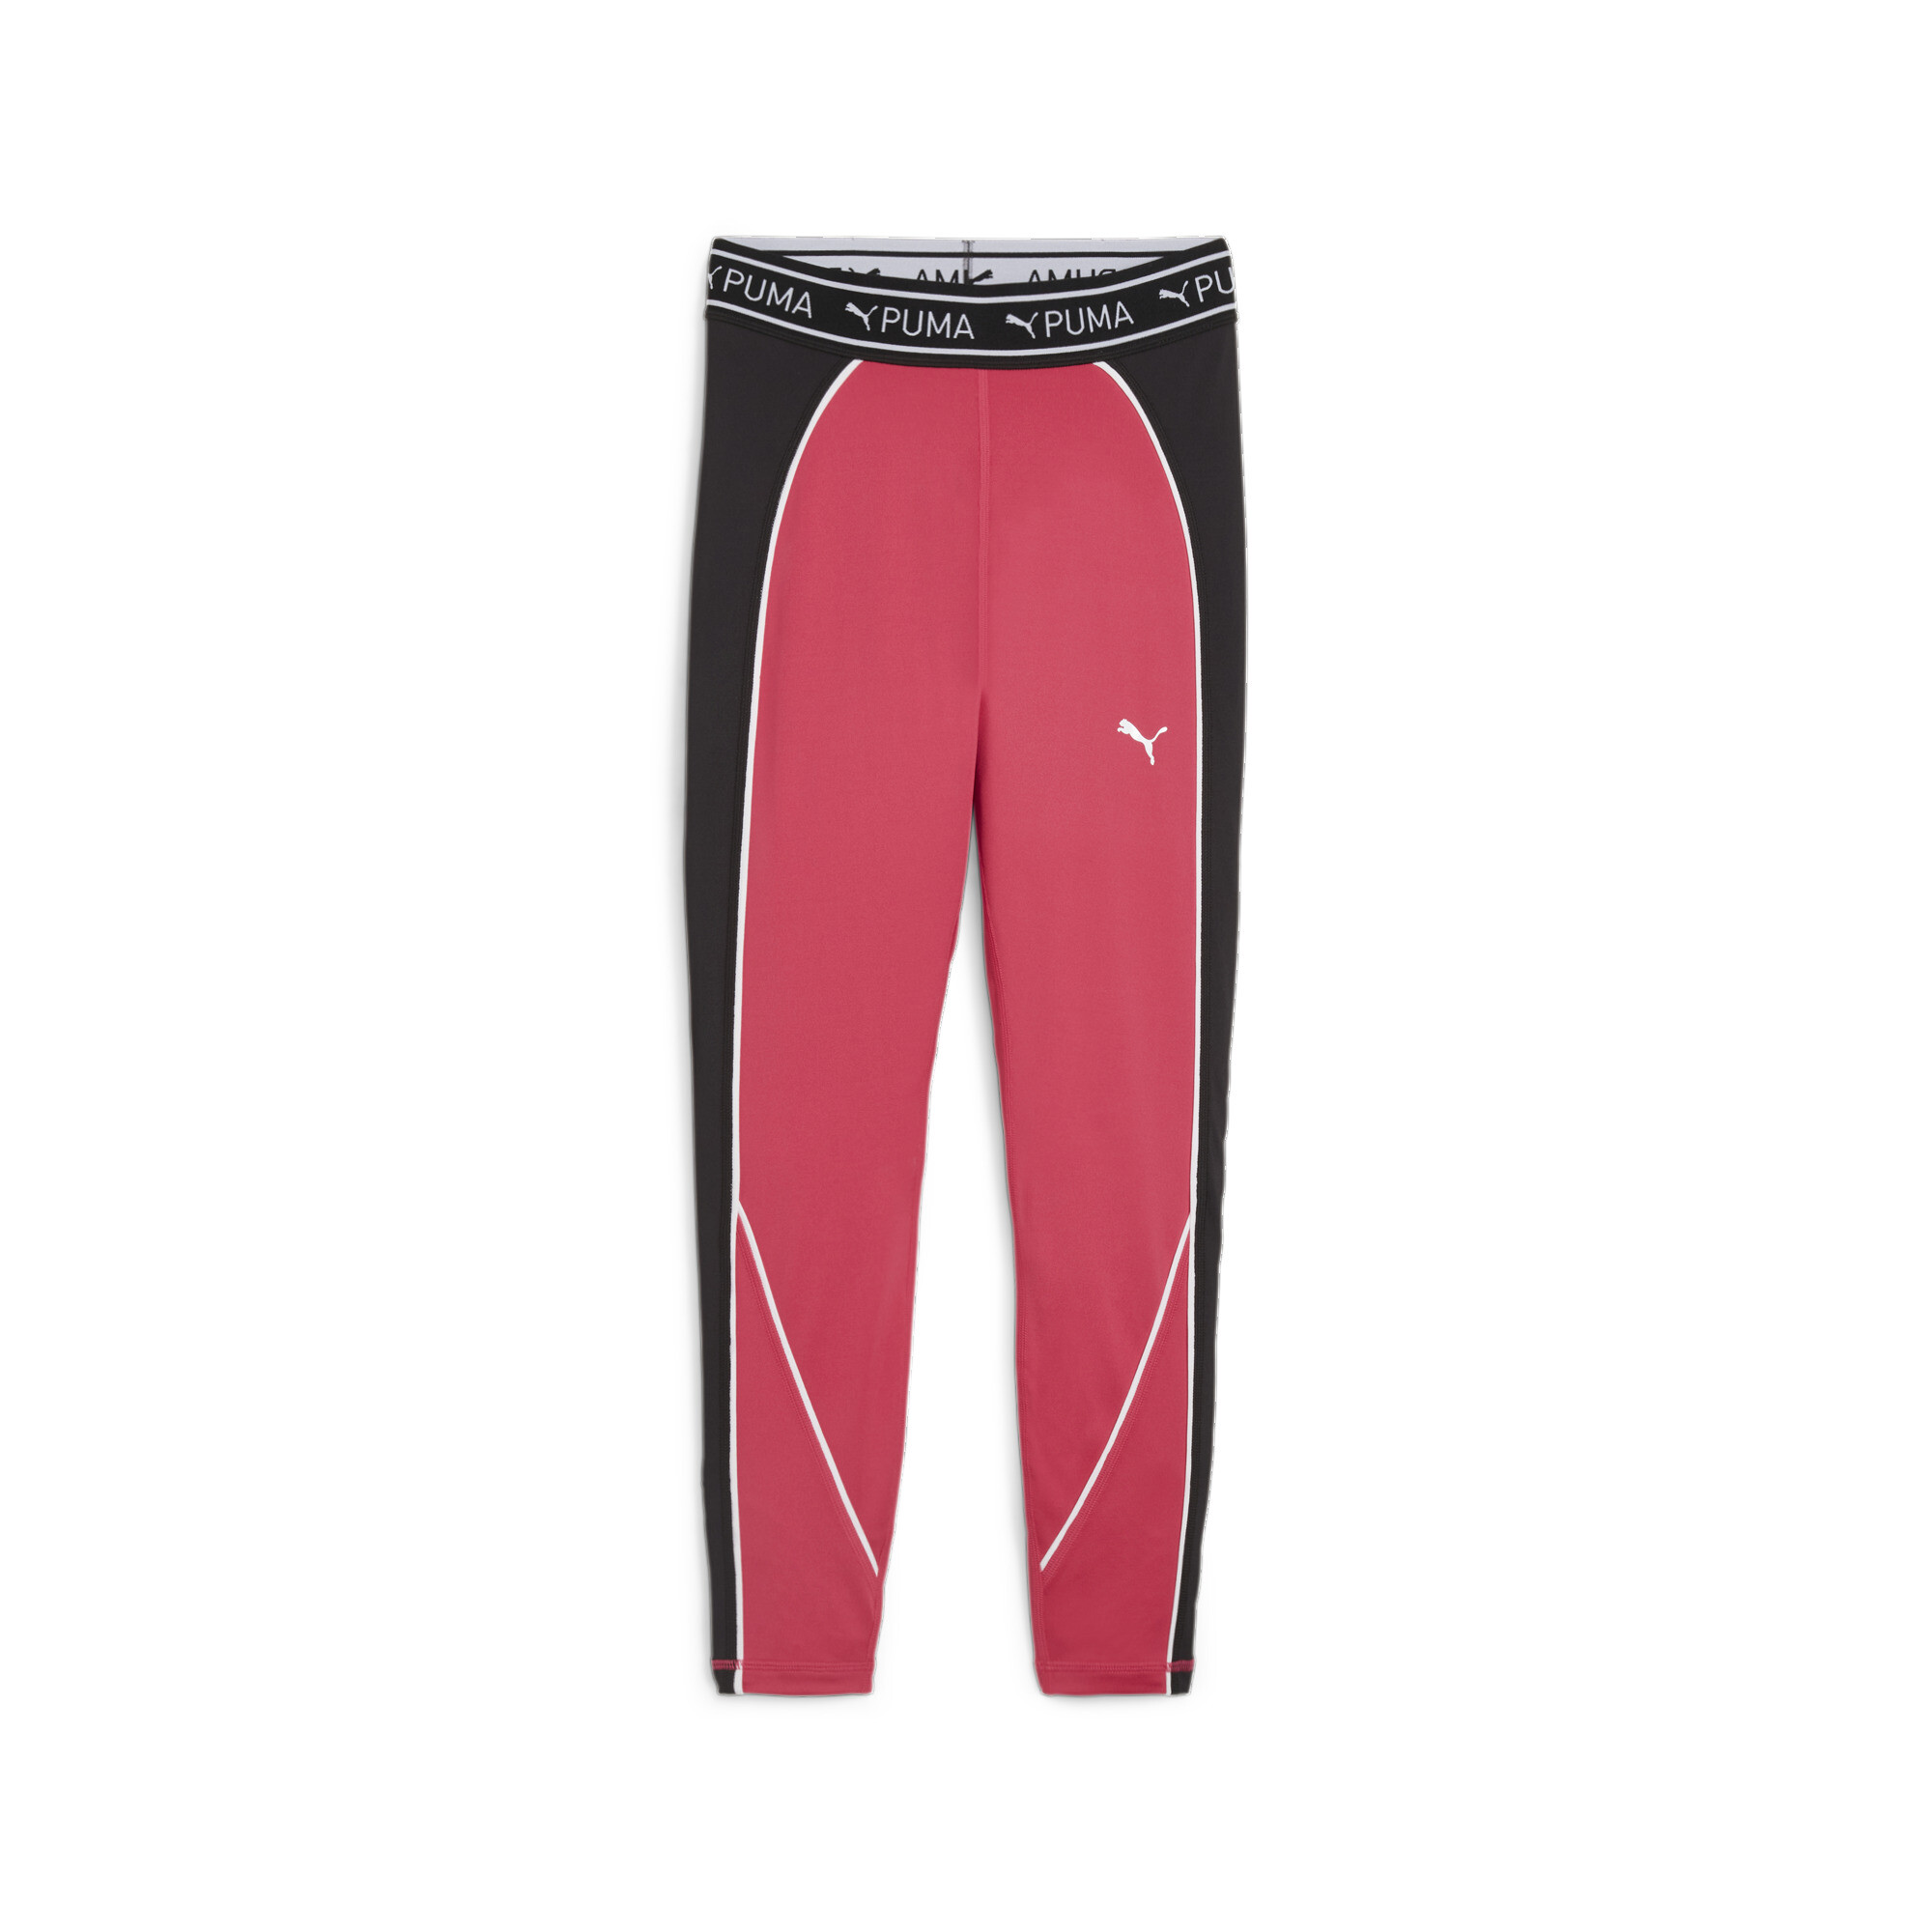 Women's Puma FIT 7/8's Training Tights, Pink, Size XXL, Clothing